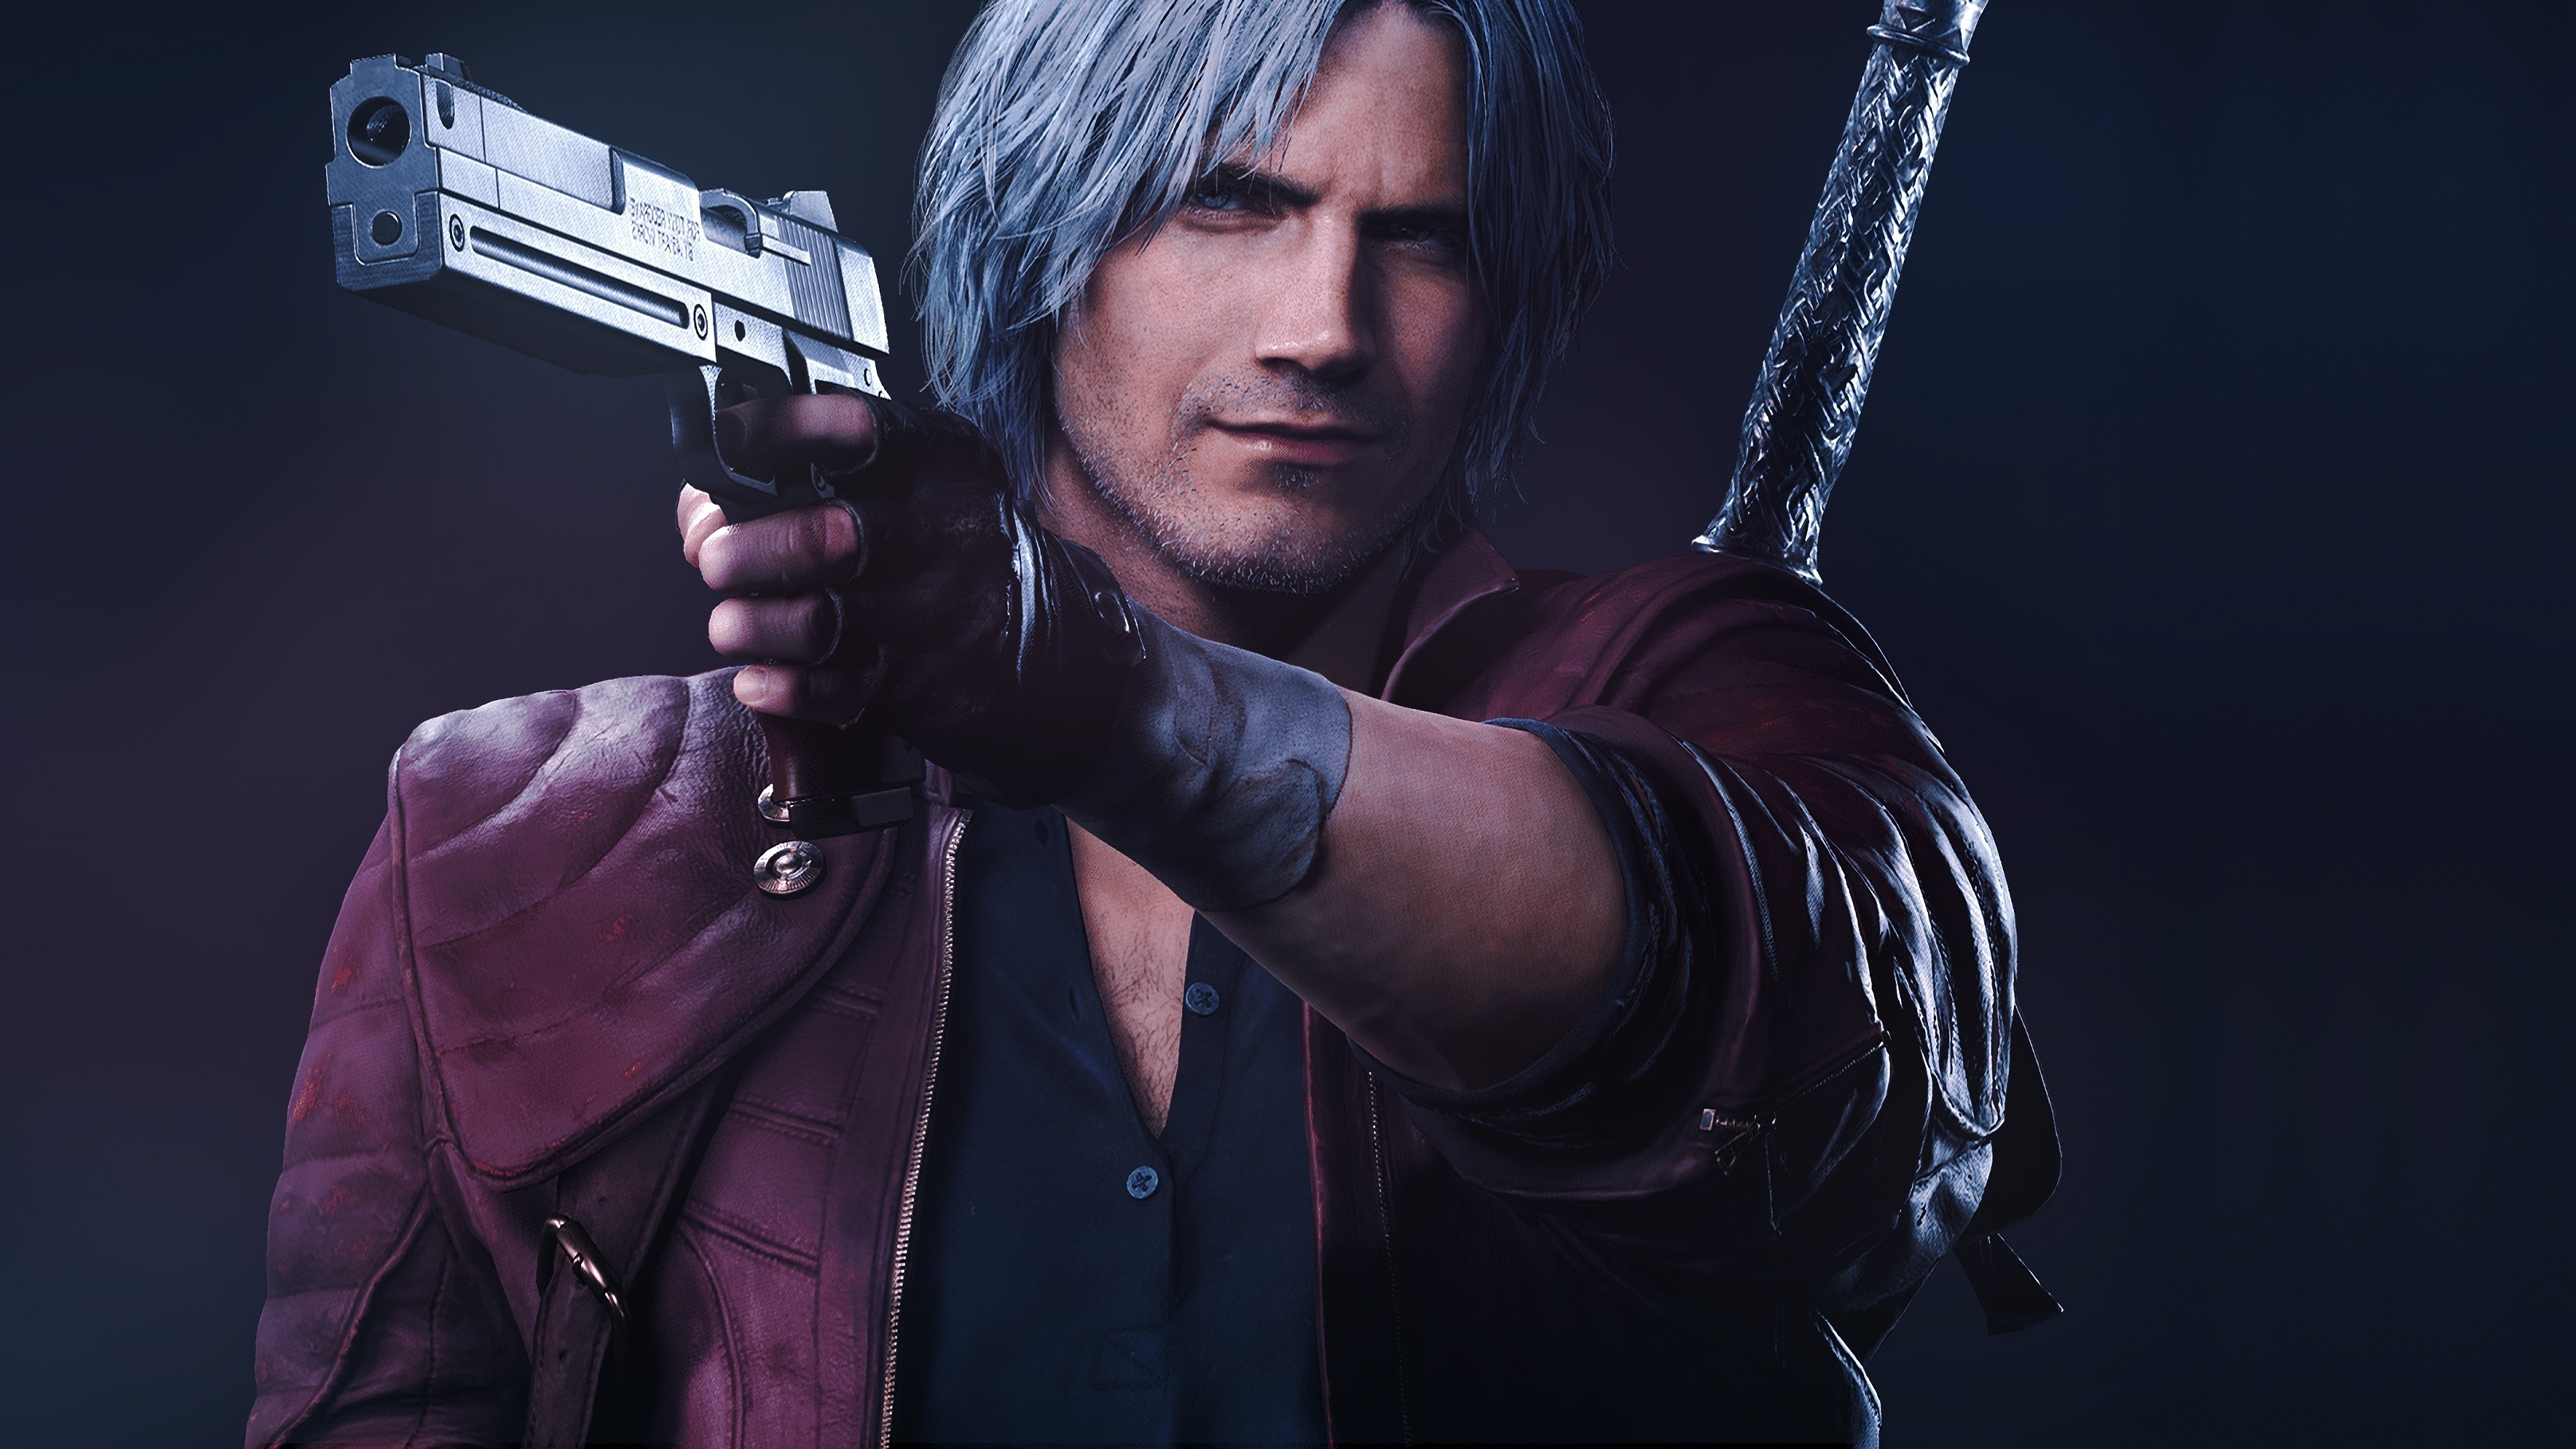 Devil may cry game. Данте Devil May Cry. Данте ДМС 5. Данте девил май край 5. Devil May Cry 5 Dante.